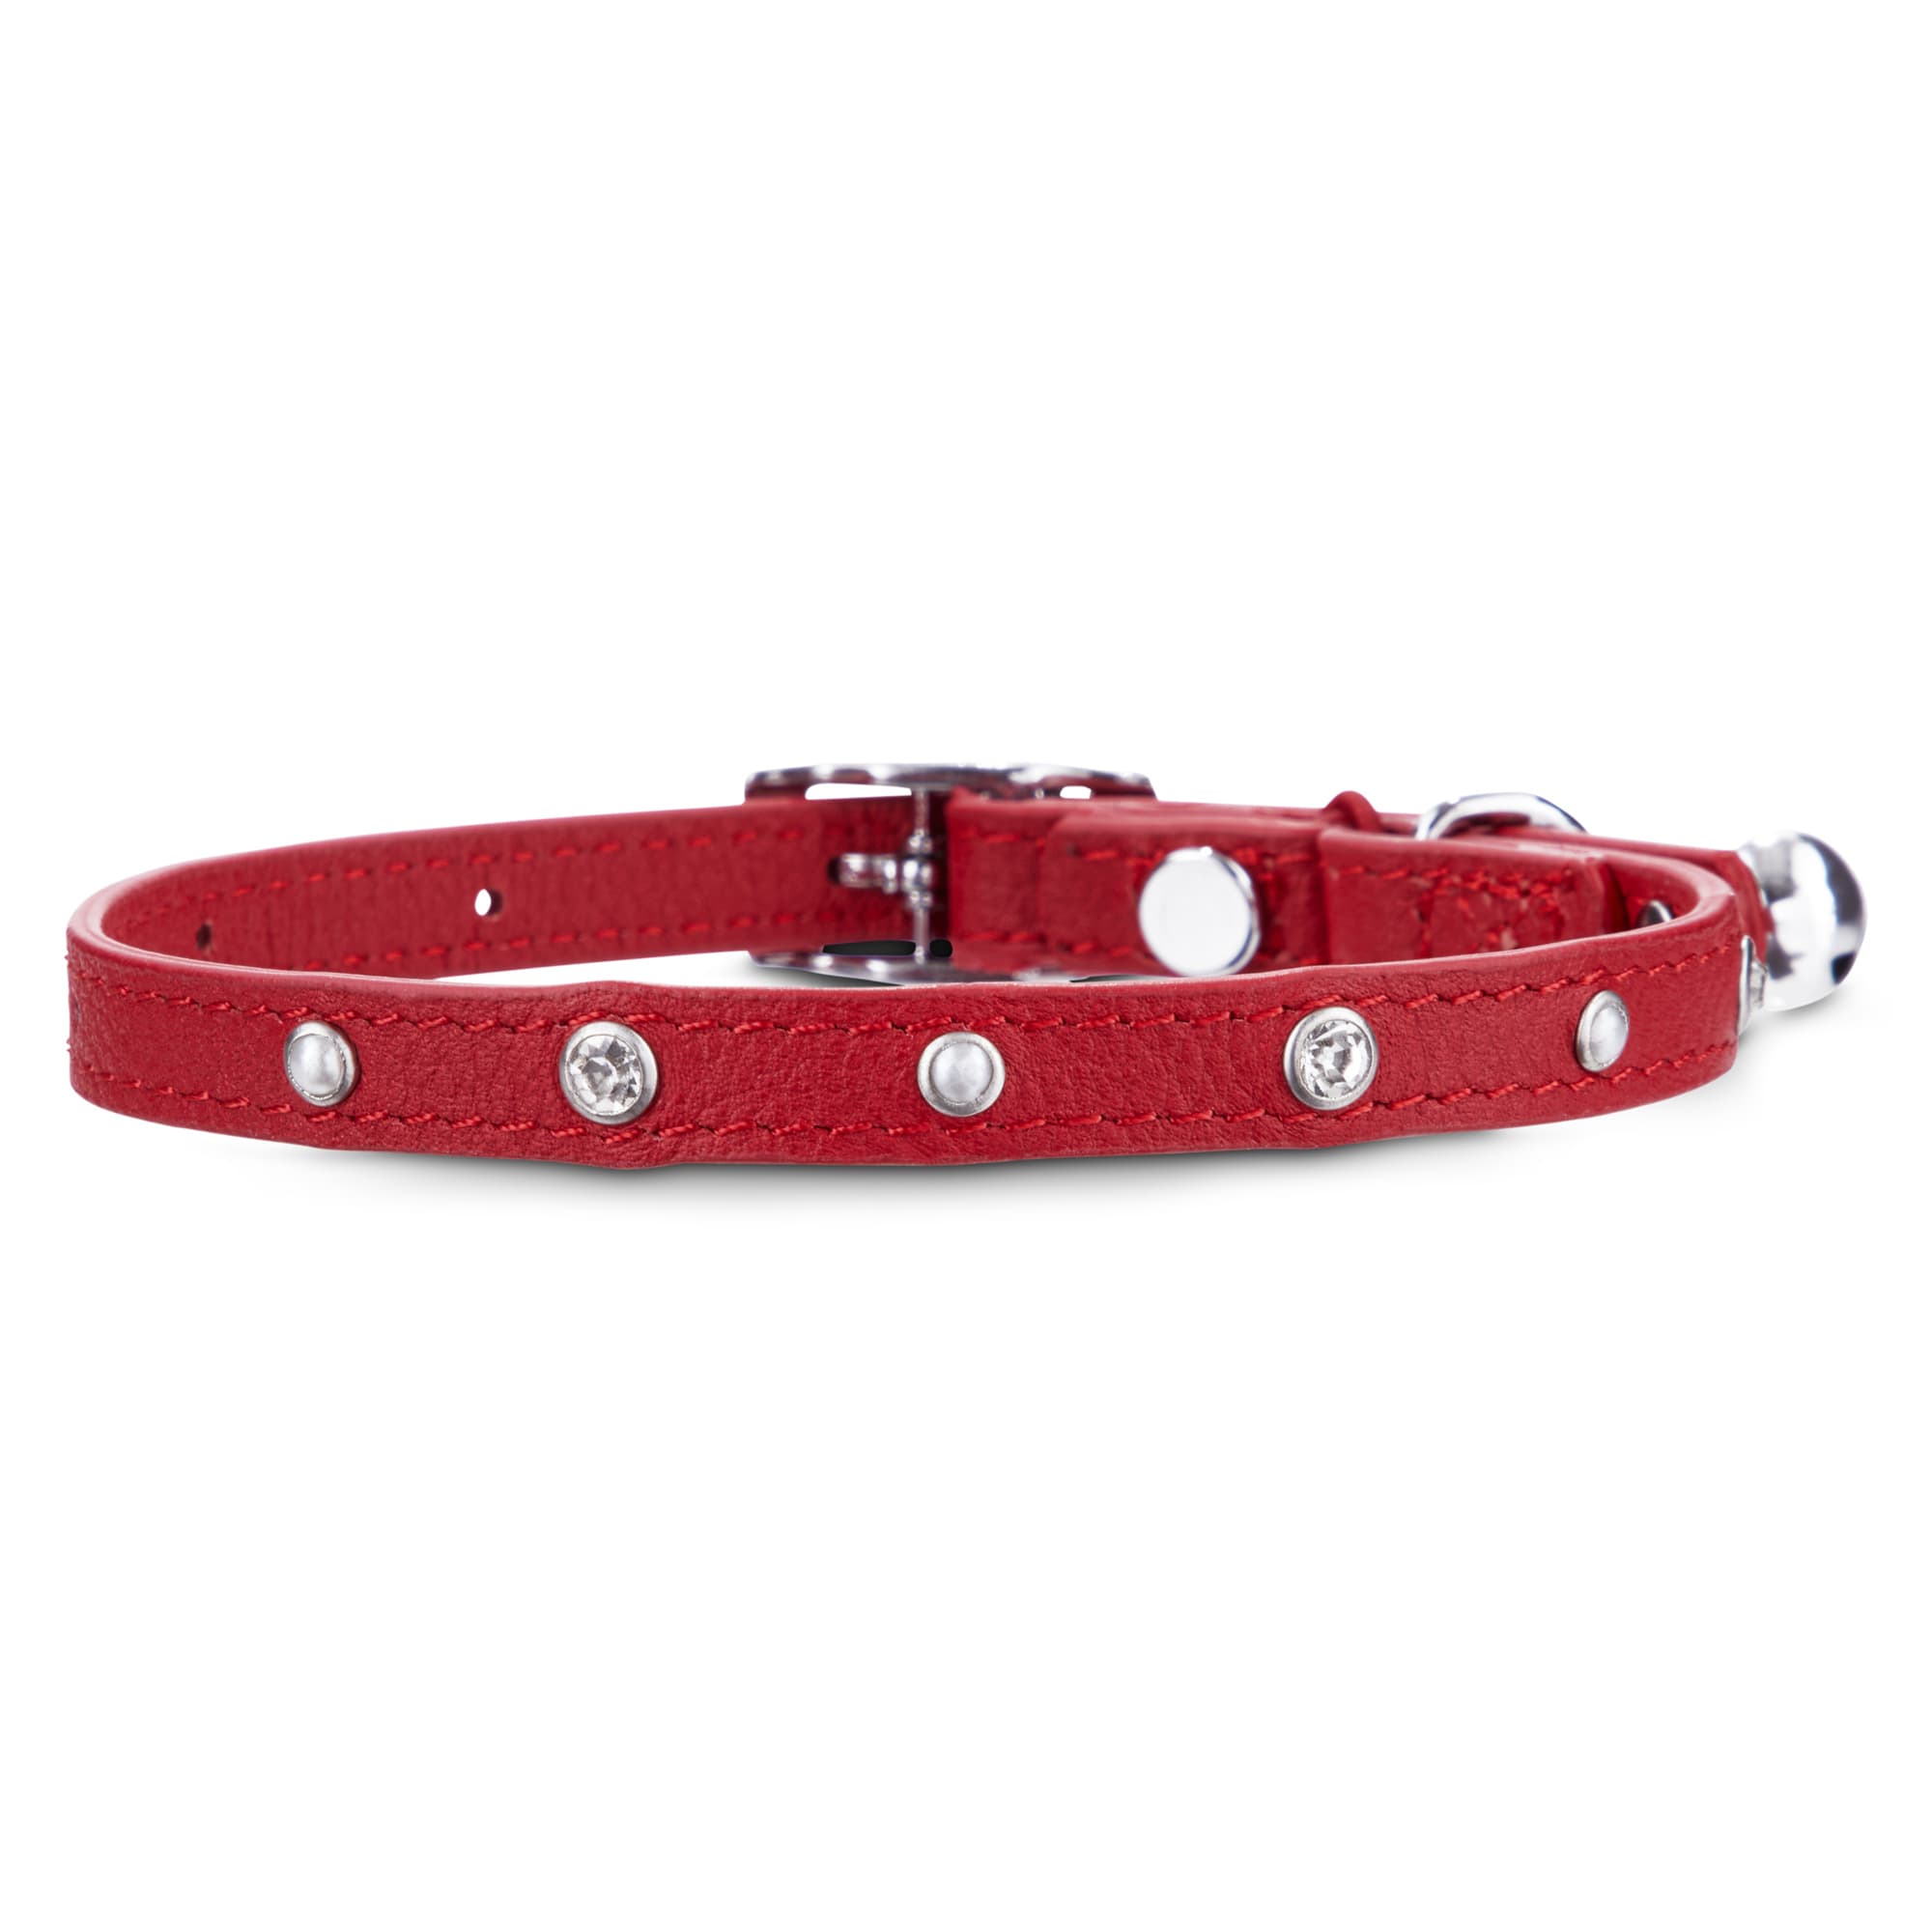 Co. Bejeweled Red Leather Cat Collar 